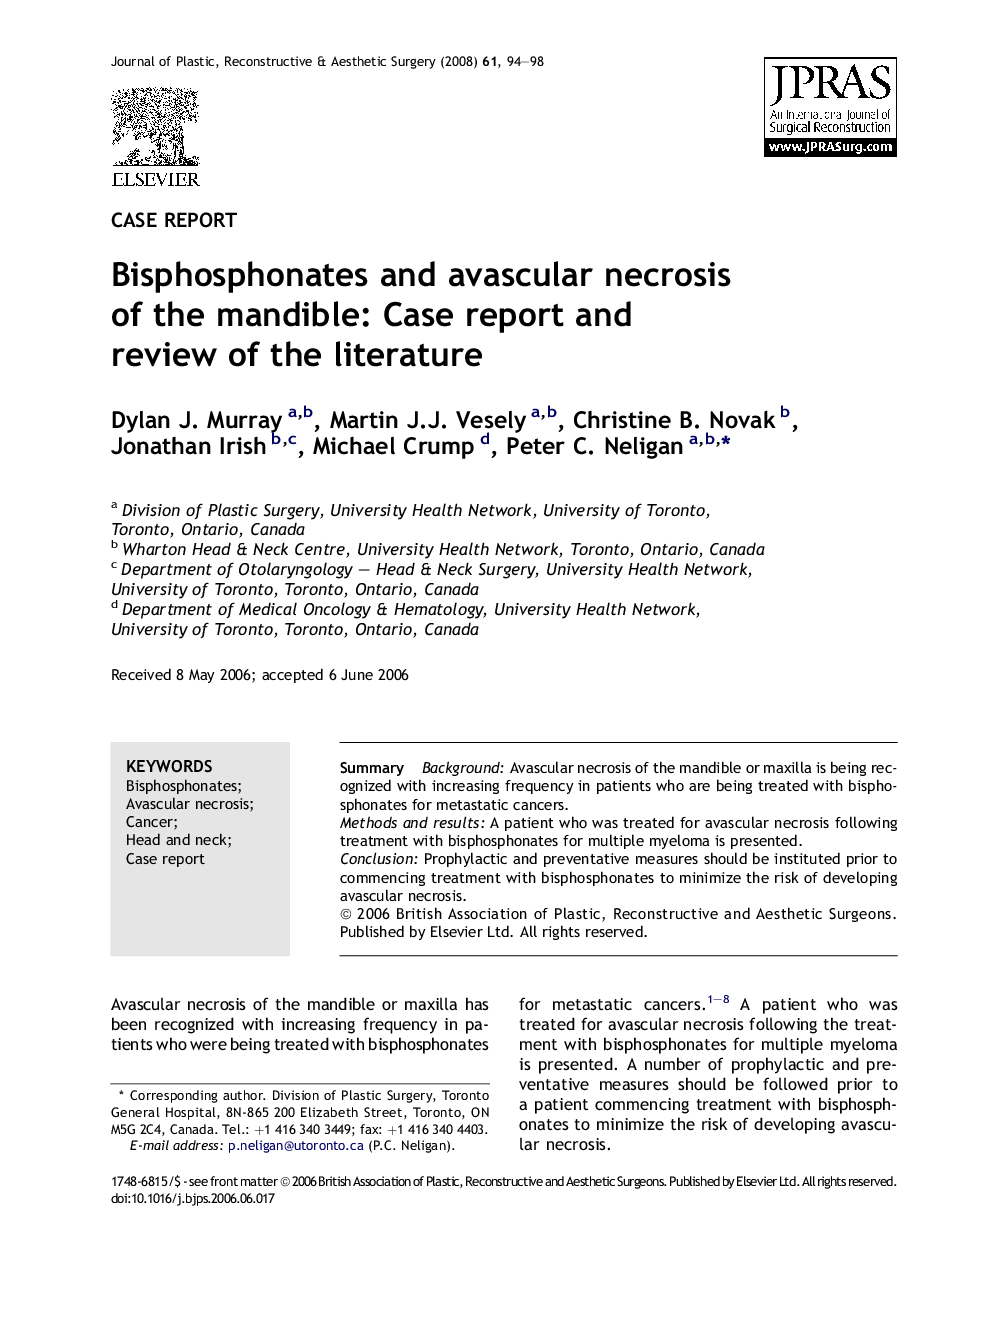 Bisphosphonates and avascular necrosis of the mandible: Case report and review of the literature